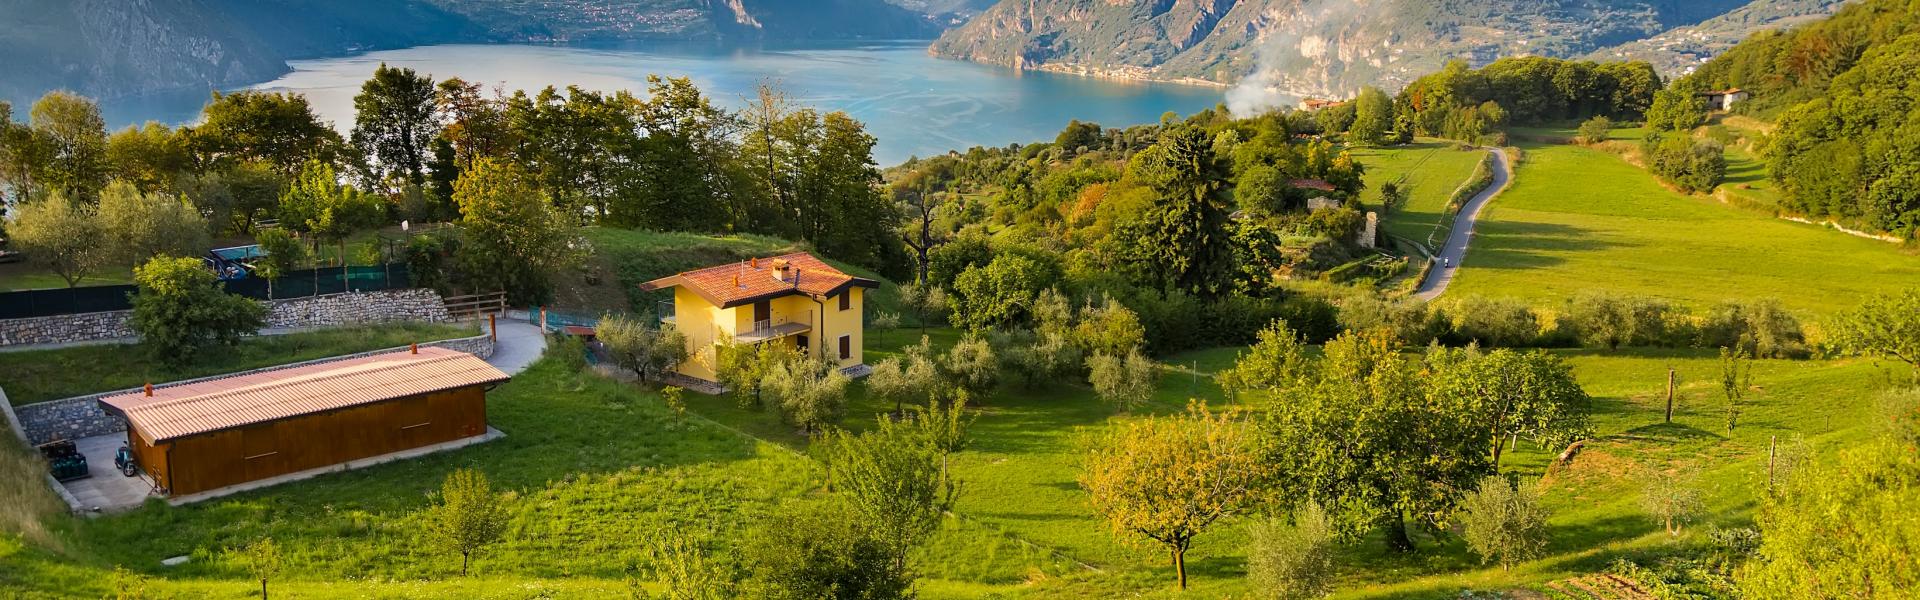 Find the ideal holiday home by Lake Iseo for your Italian adventure - Casamundo